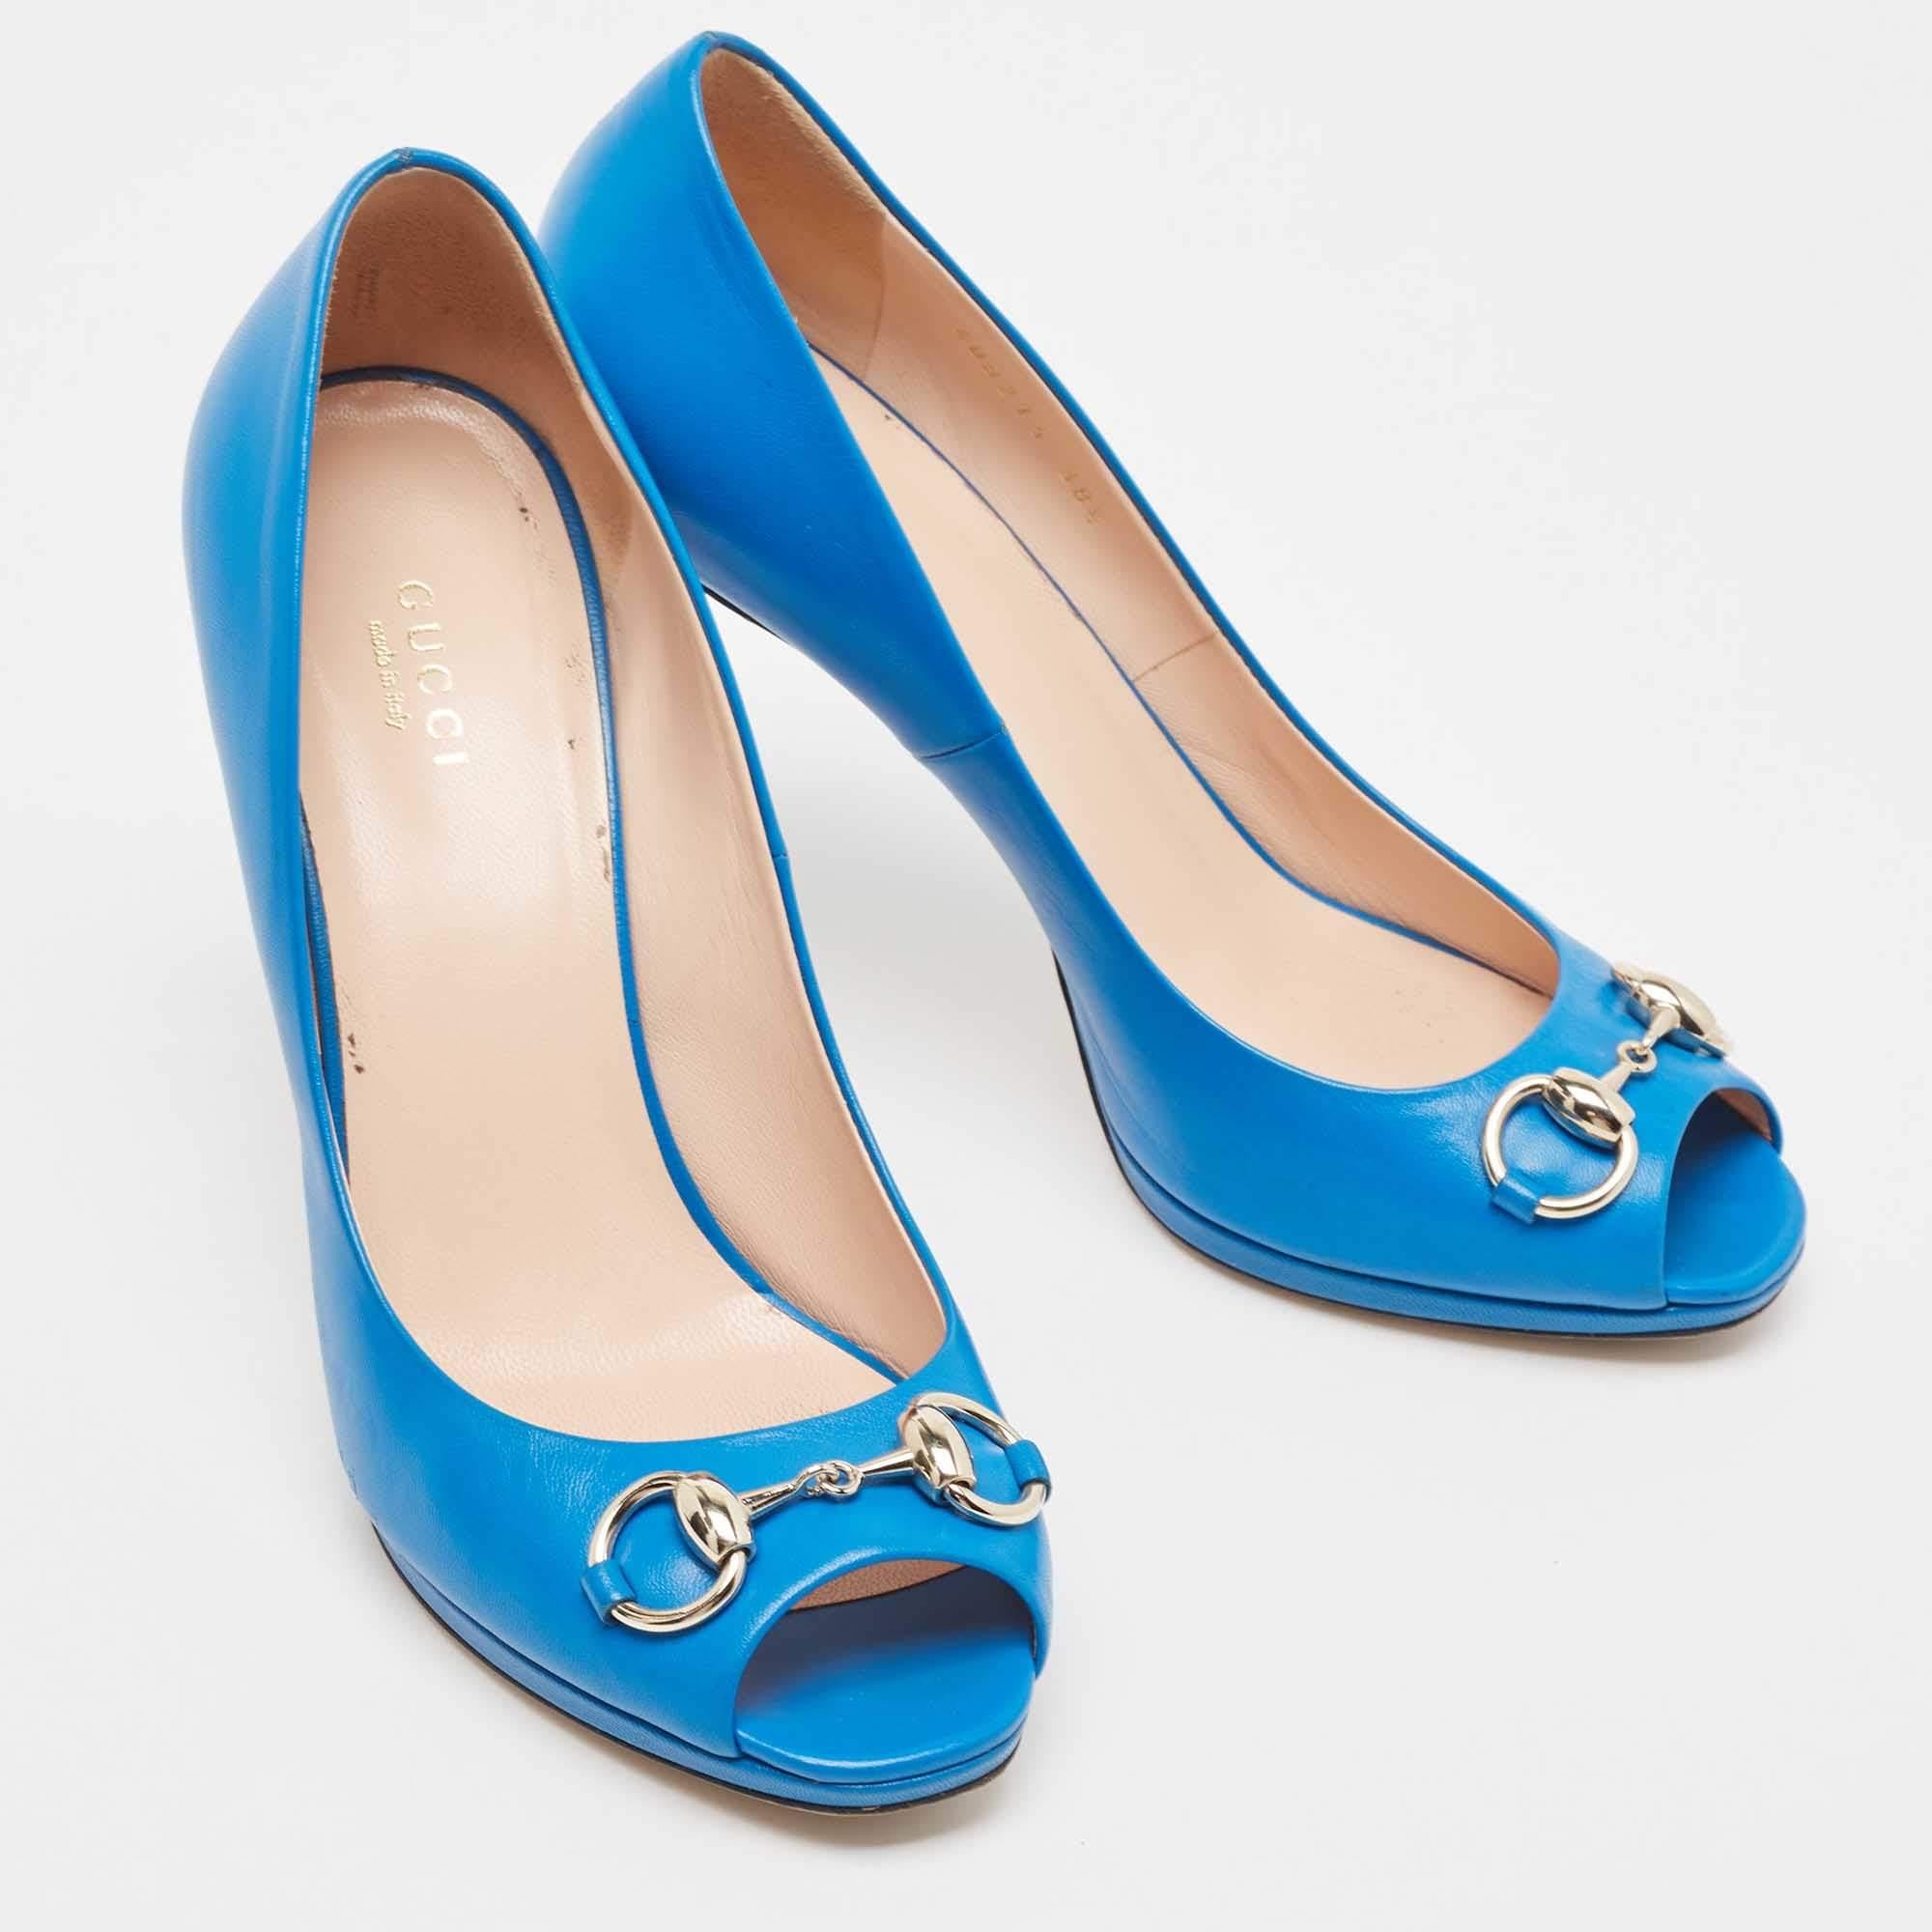 Gucci Blue Leather New Hollywood Platform Pumps Size 38.5 For Sale 1